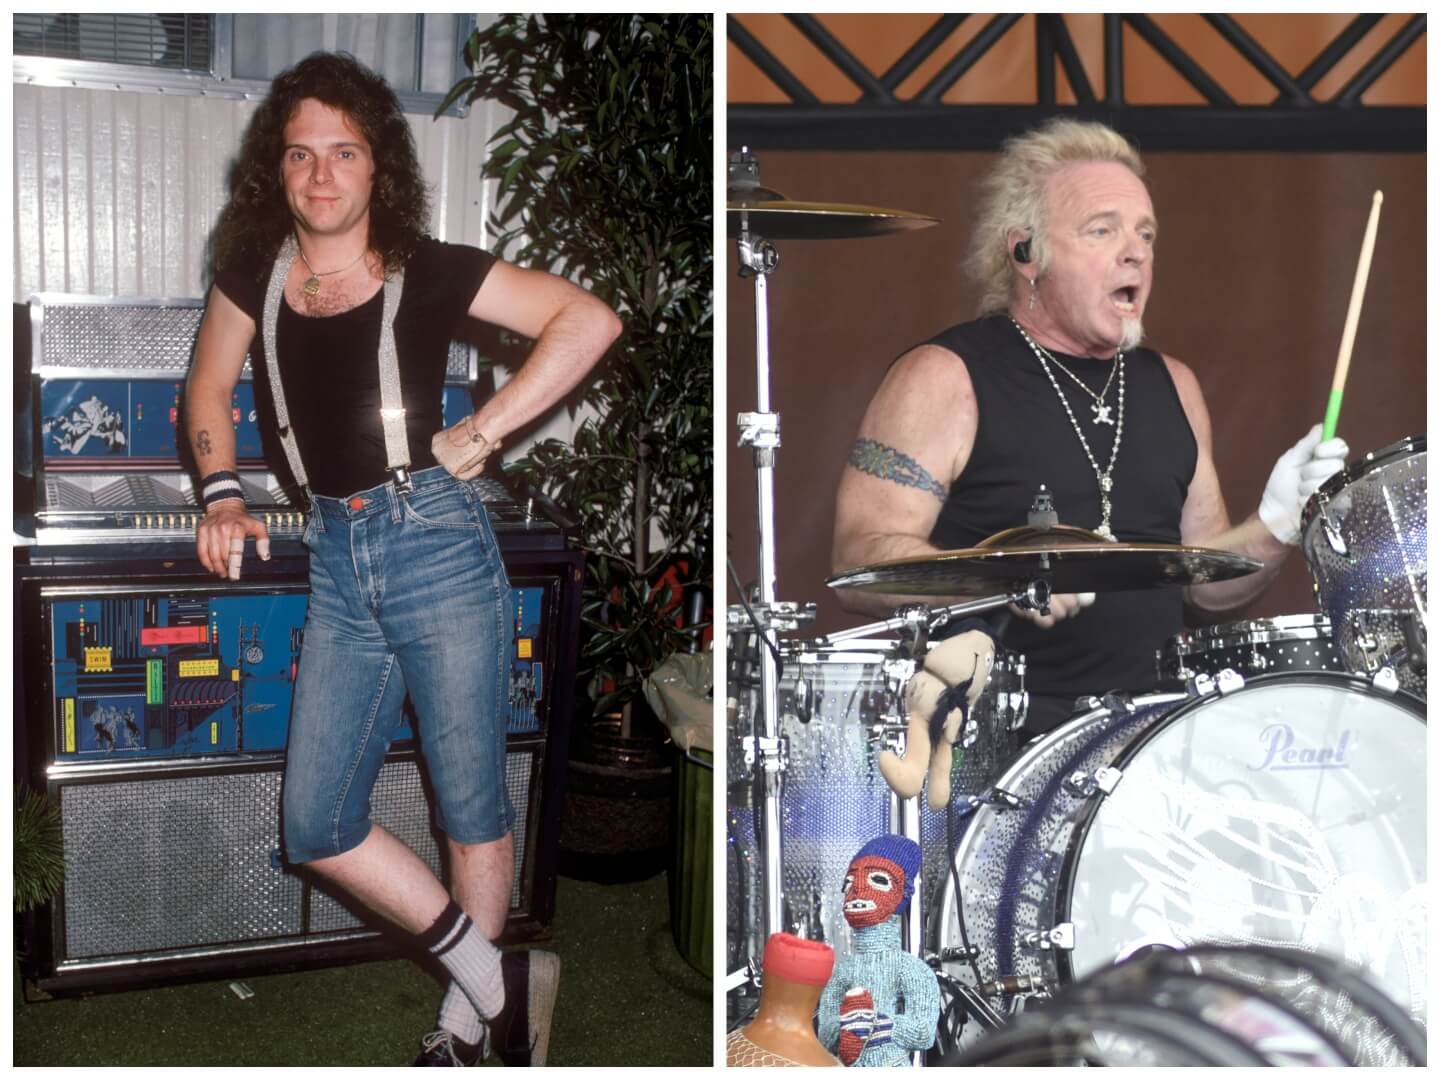 Joey Kramer wears denim shorts and suspenders and stands with his hand on his hip in 1976. Joey Kramer wears a black tank top and plays drums in 2018.